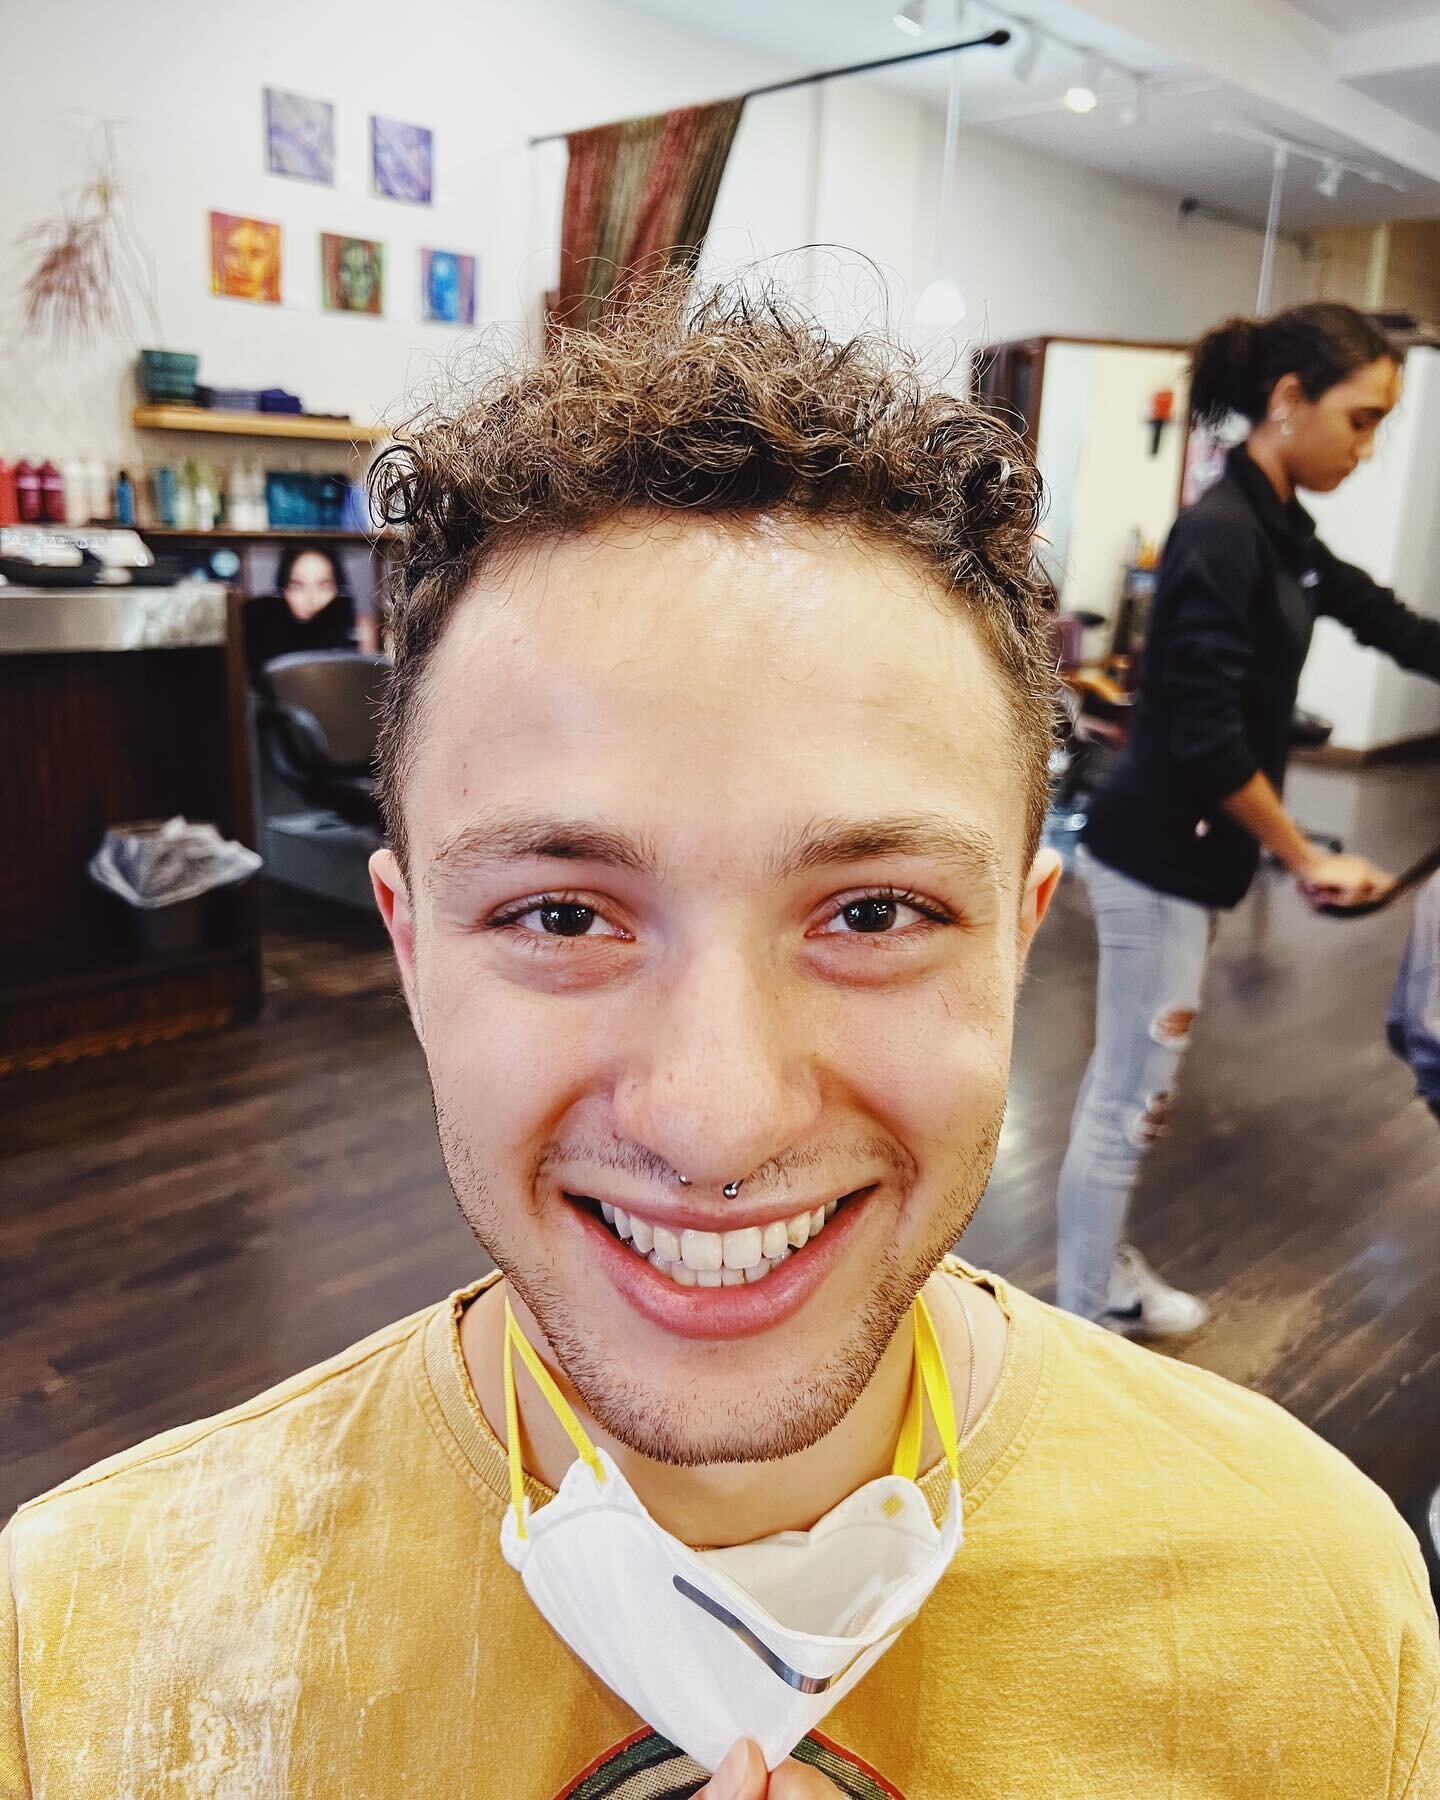 What a great #makeover for him! 😎 swipe left to see the before and afters. How fun! Cut by @kariman.rootshairsalon #chicagosalon #chicagostylist #westloopsalon #fultonmarket #avedasalon #loveaveda #crueltyfree